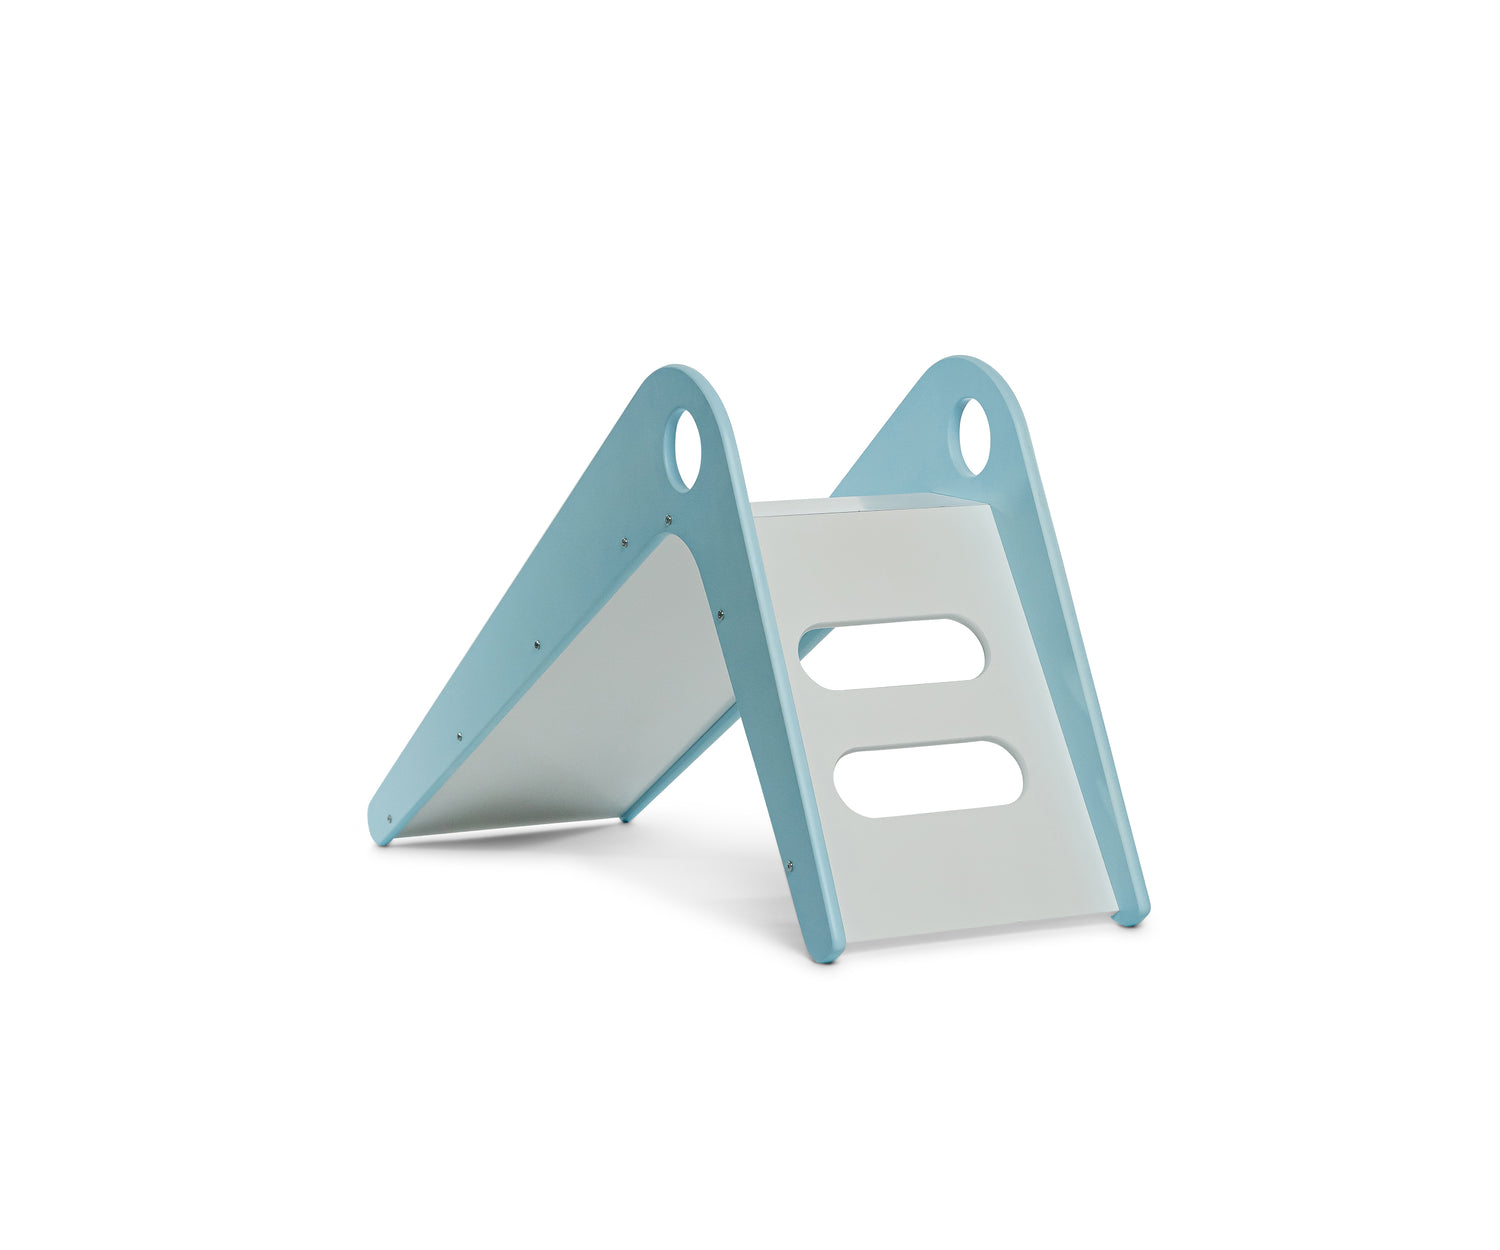 Manuka - Avenlur's Safe and Fun Indoor Toddler Slide in Blue - Rear View